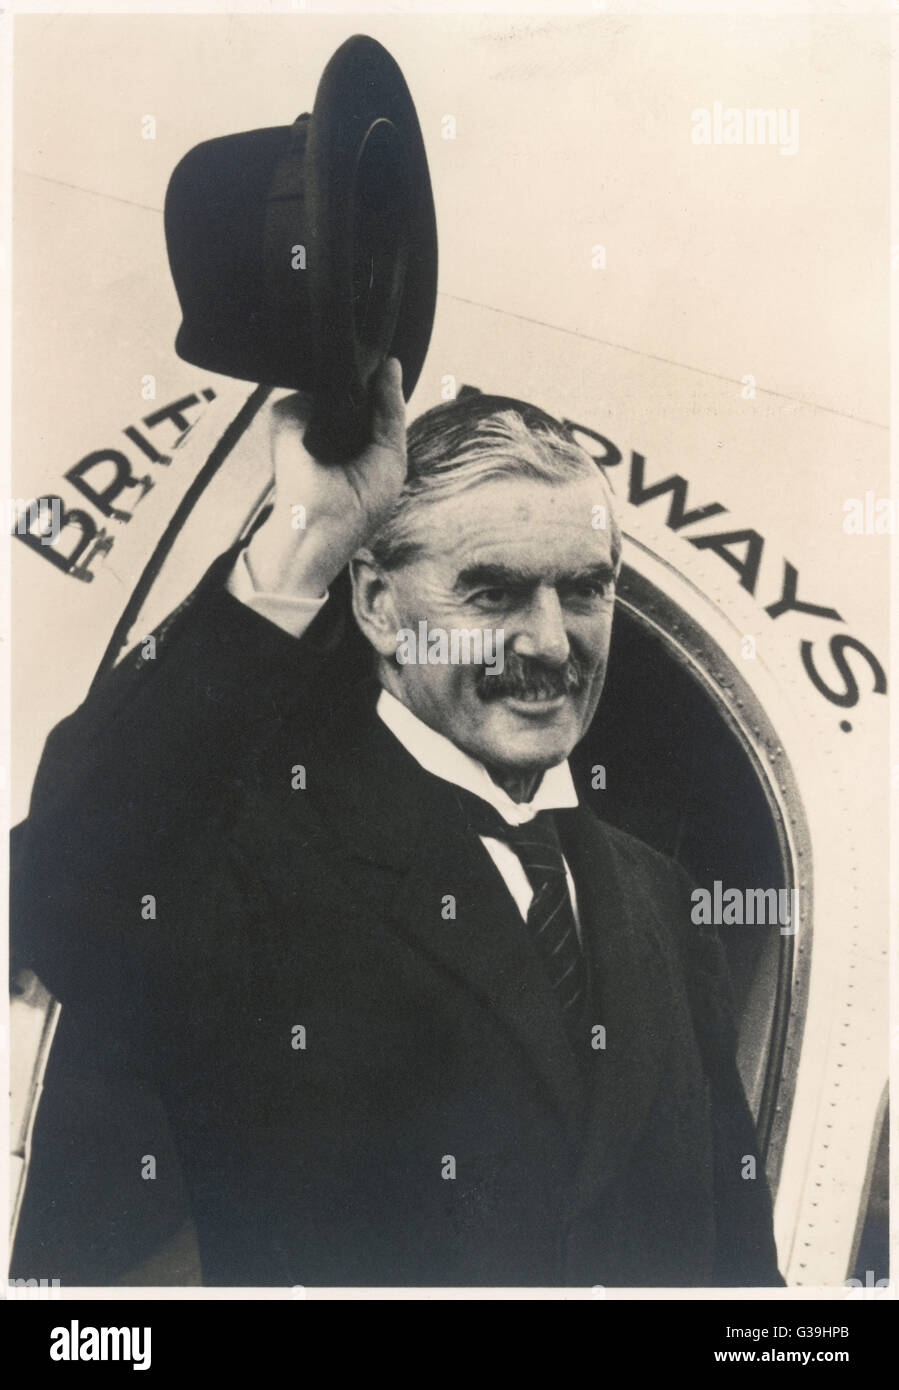 British Prime Minister, Neville Chamberlain (1869-1940), waves goodbye as he boards an airplane at Heston Airport on his way to Bad Godesberg, Germany to meet Adolf Hitler, for the second time, to hold talks regarding the Sudetenland. Chamberlain's policy Stock Photo